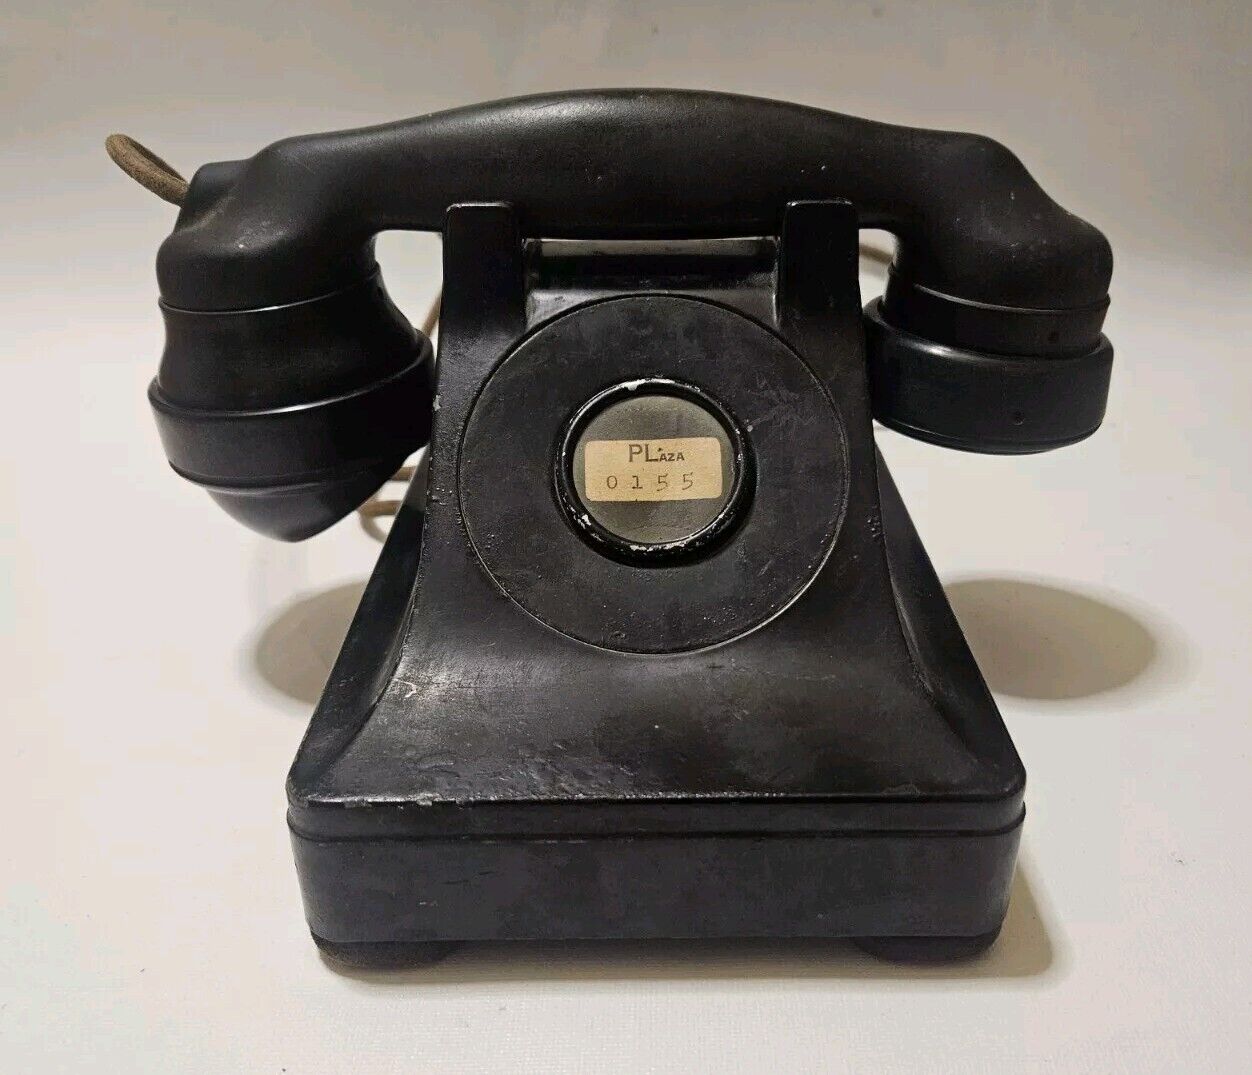 Western Electric 302 Telephone From 1937. No Dial. No Vented Pickup Cup. 